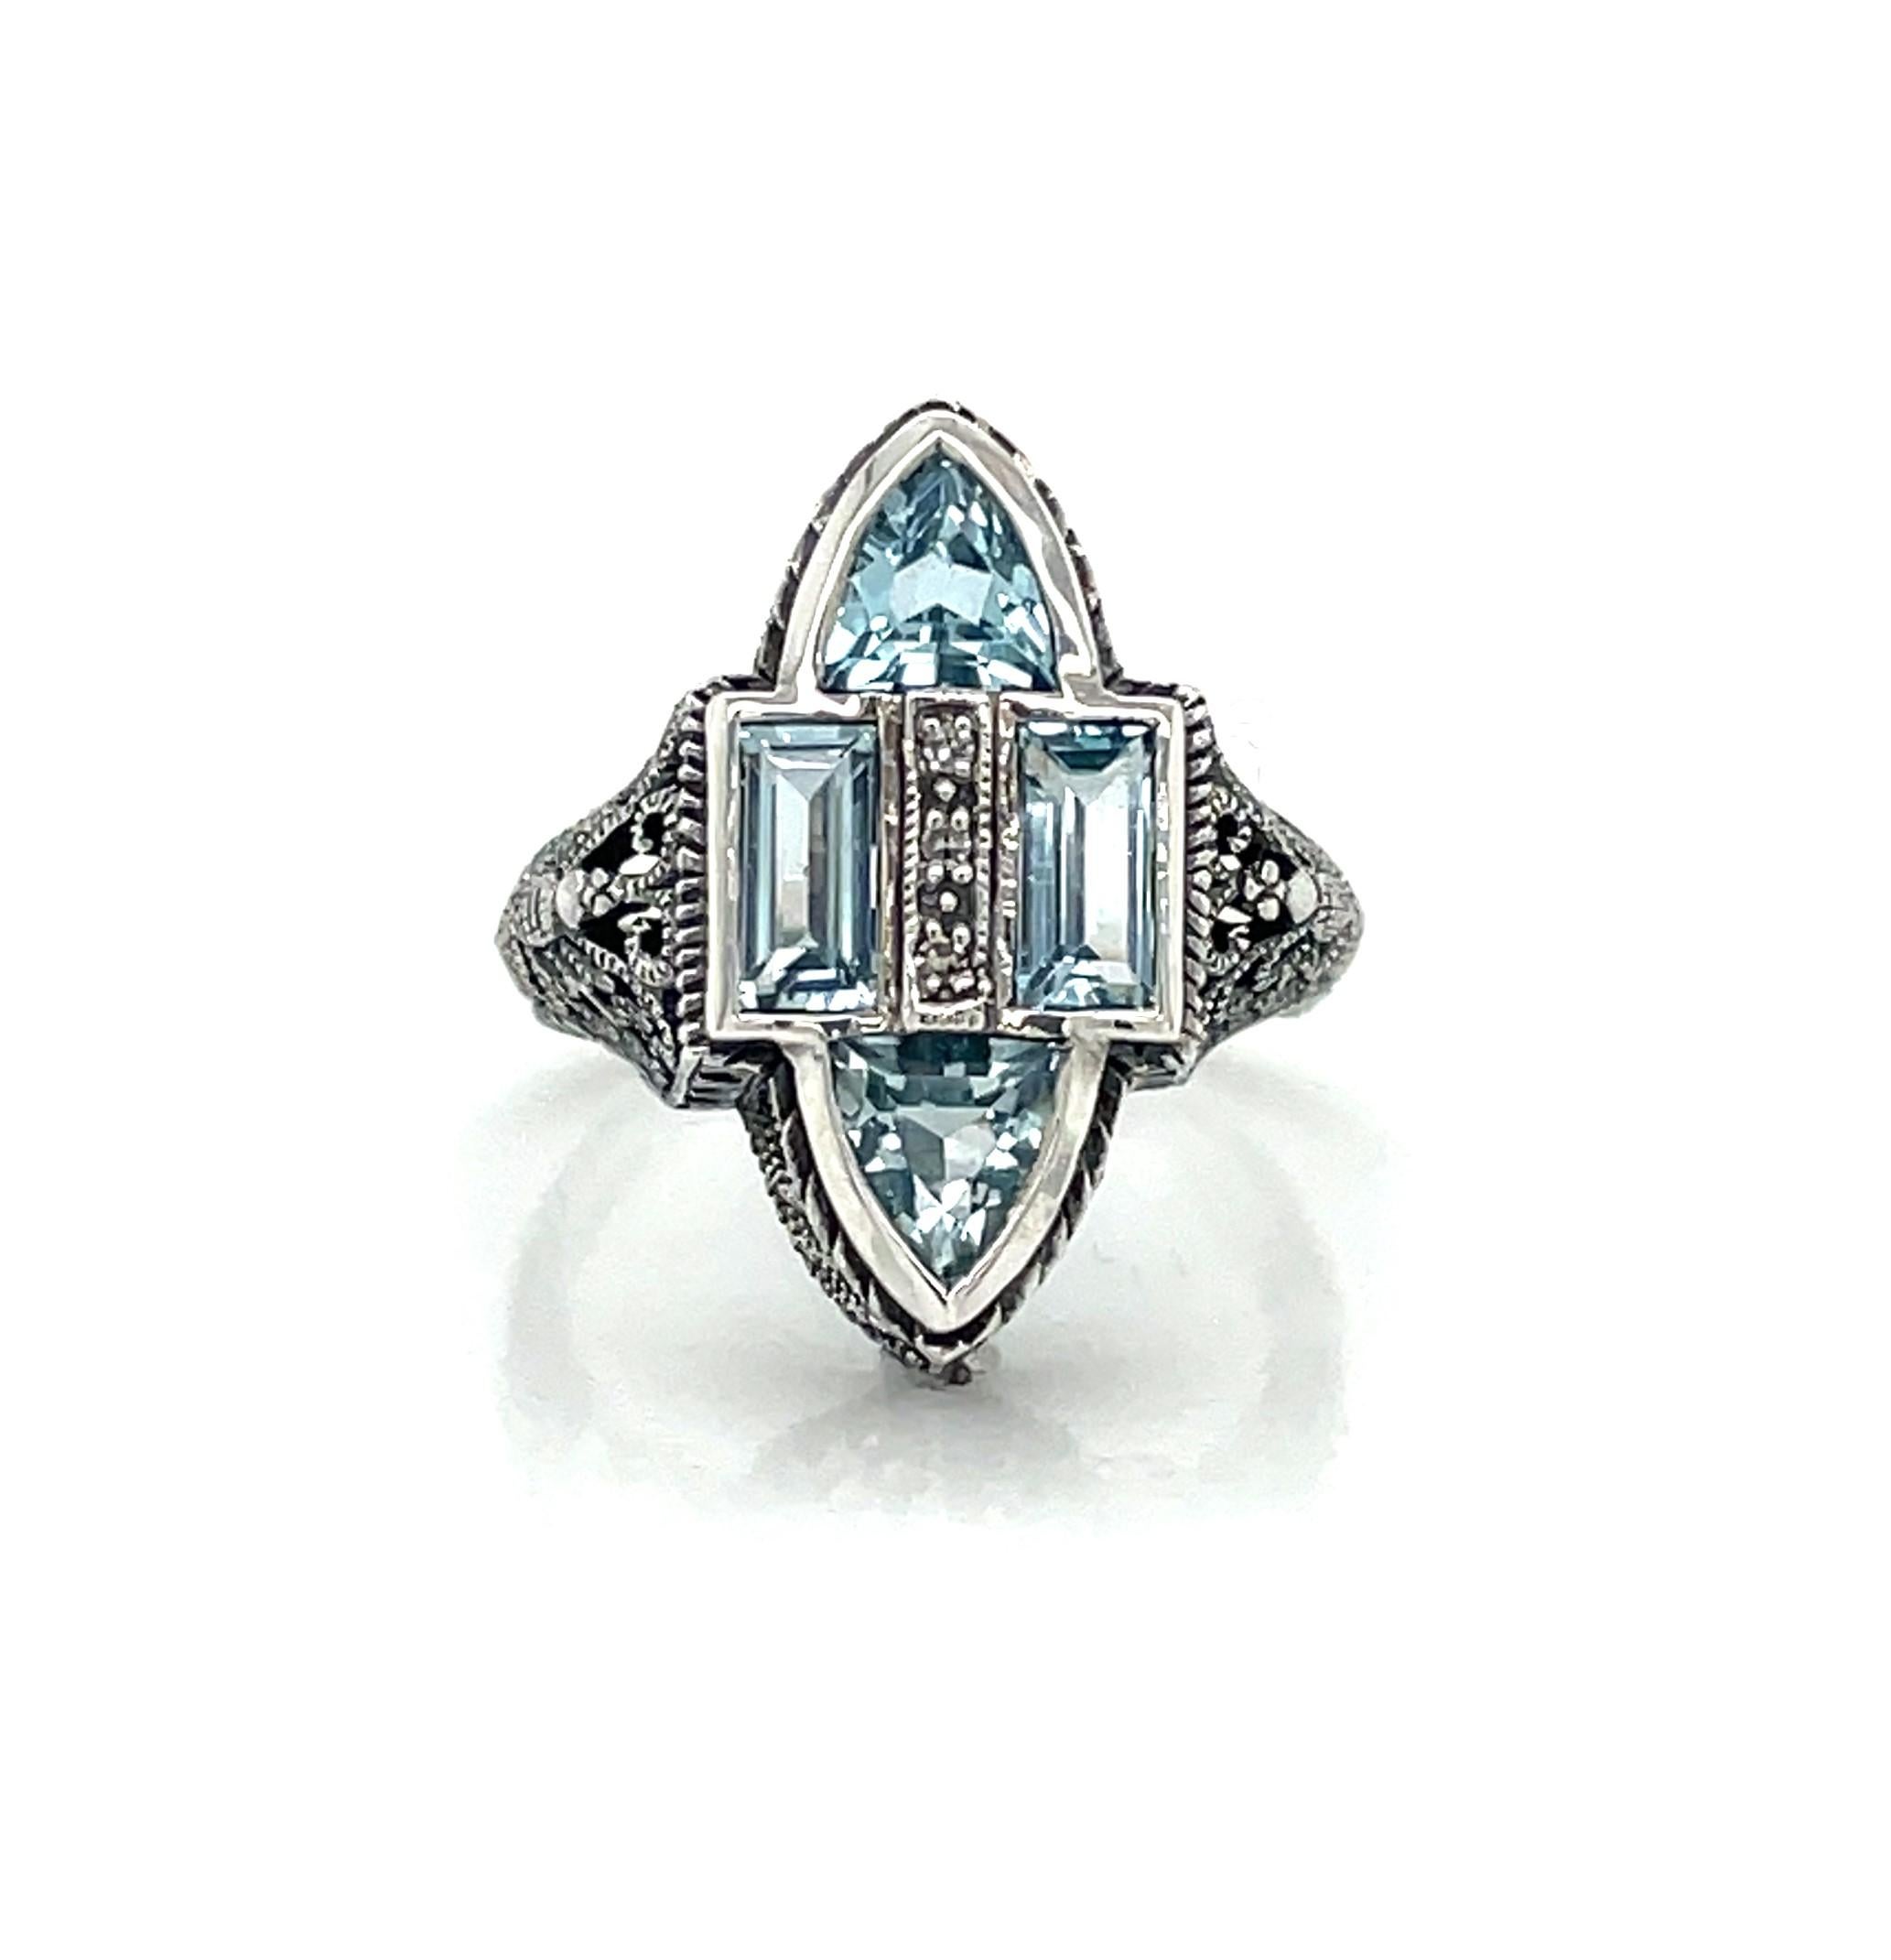 Four stunning mixed cut blue topaz stones accented with diamonds are displayed in this antique-style .925 sterling silver filigree ring. 
In ring size 6. New and presented in miniature antique style ring gift box.     